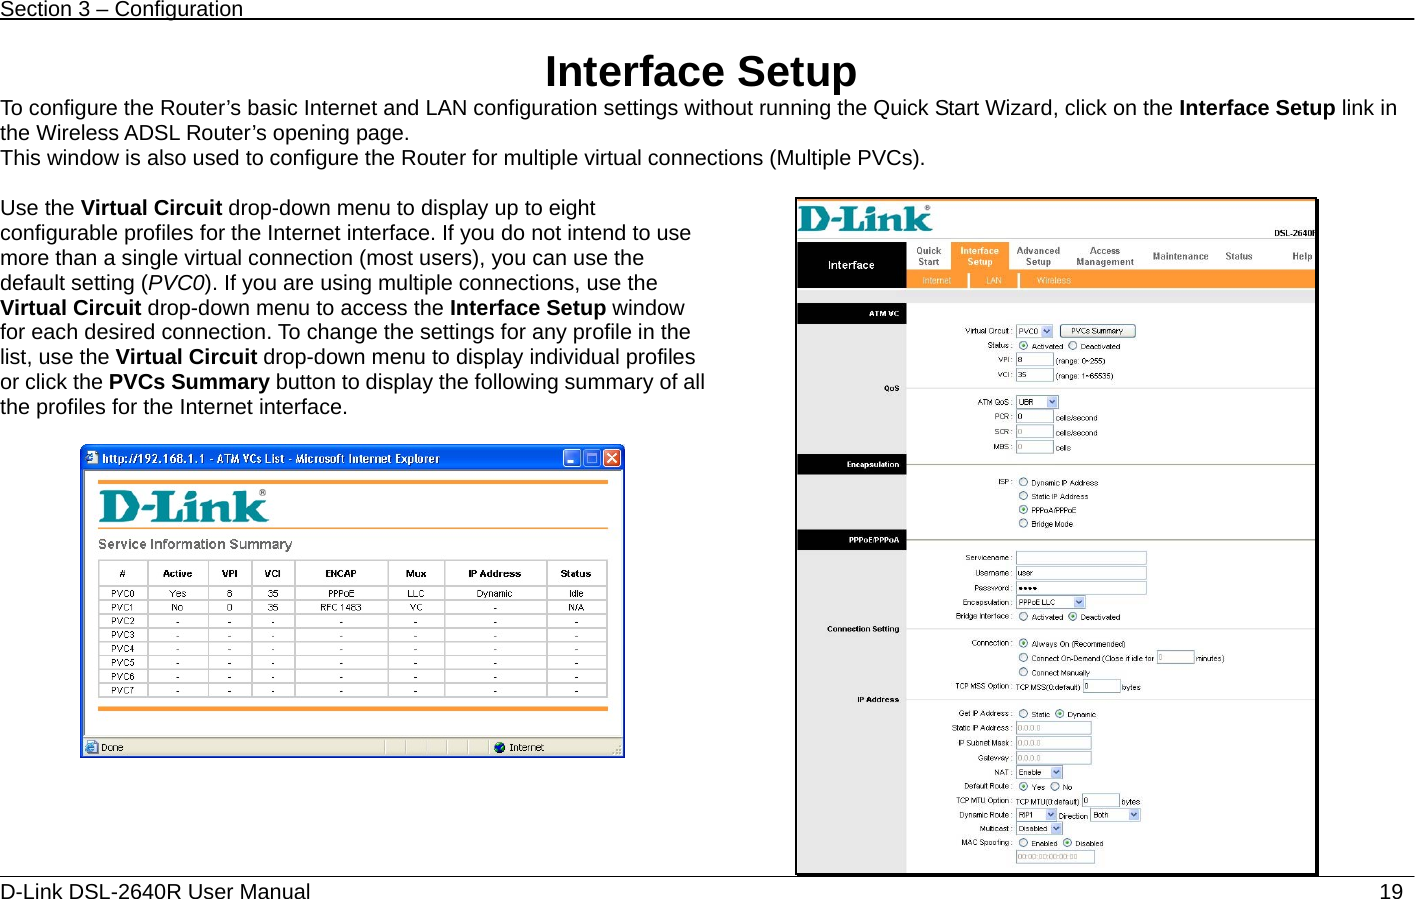 Section 3 – Configuration   D-Link DSL-2640R User Manual                           19Interface Setup To configure the Router’s basic Internet and LAN configuration settings without running the Quick Start Wizard, click on the Interface Setup link in the Wireless ADSL Router’s opening page.   This window is also used to configure the Router for multiple virtual connections (Multiple PVCs).  Use the Virtual Circuit drop-down menu to display up to eight configurable profiles for the Internet interface. If you do not intend to use more than a single virtual connection (most users), you can use the default setting (PVC0). If you are using multiple connections, use the Virtual Circuit drop-down menu to access the Interface Setup window for each desired connection. To change the settings for any profile in the list, use the Virtual Circuit drop-down menu to display individual profiles or click the PVCs Summary button to display the following summary of all the profiles for the Internet interface.    